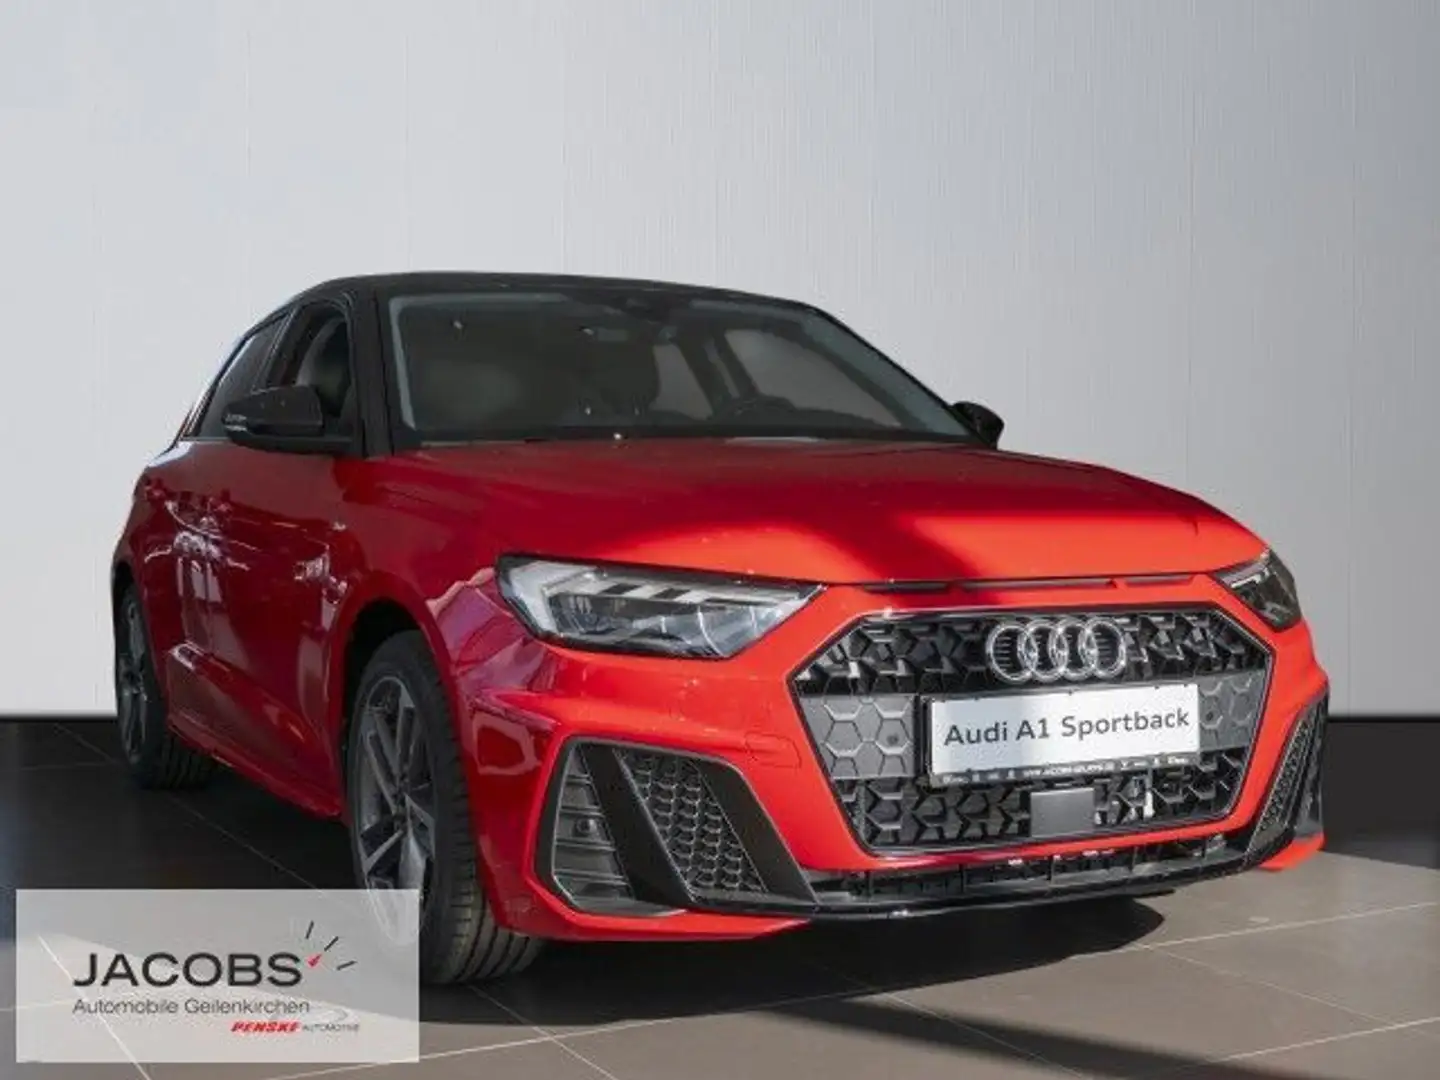 Audi A1 Sportback S line 30 TFSI 81110 kWPS S tronic UPE 3 Red - 2